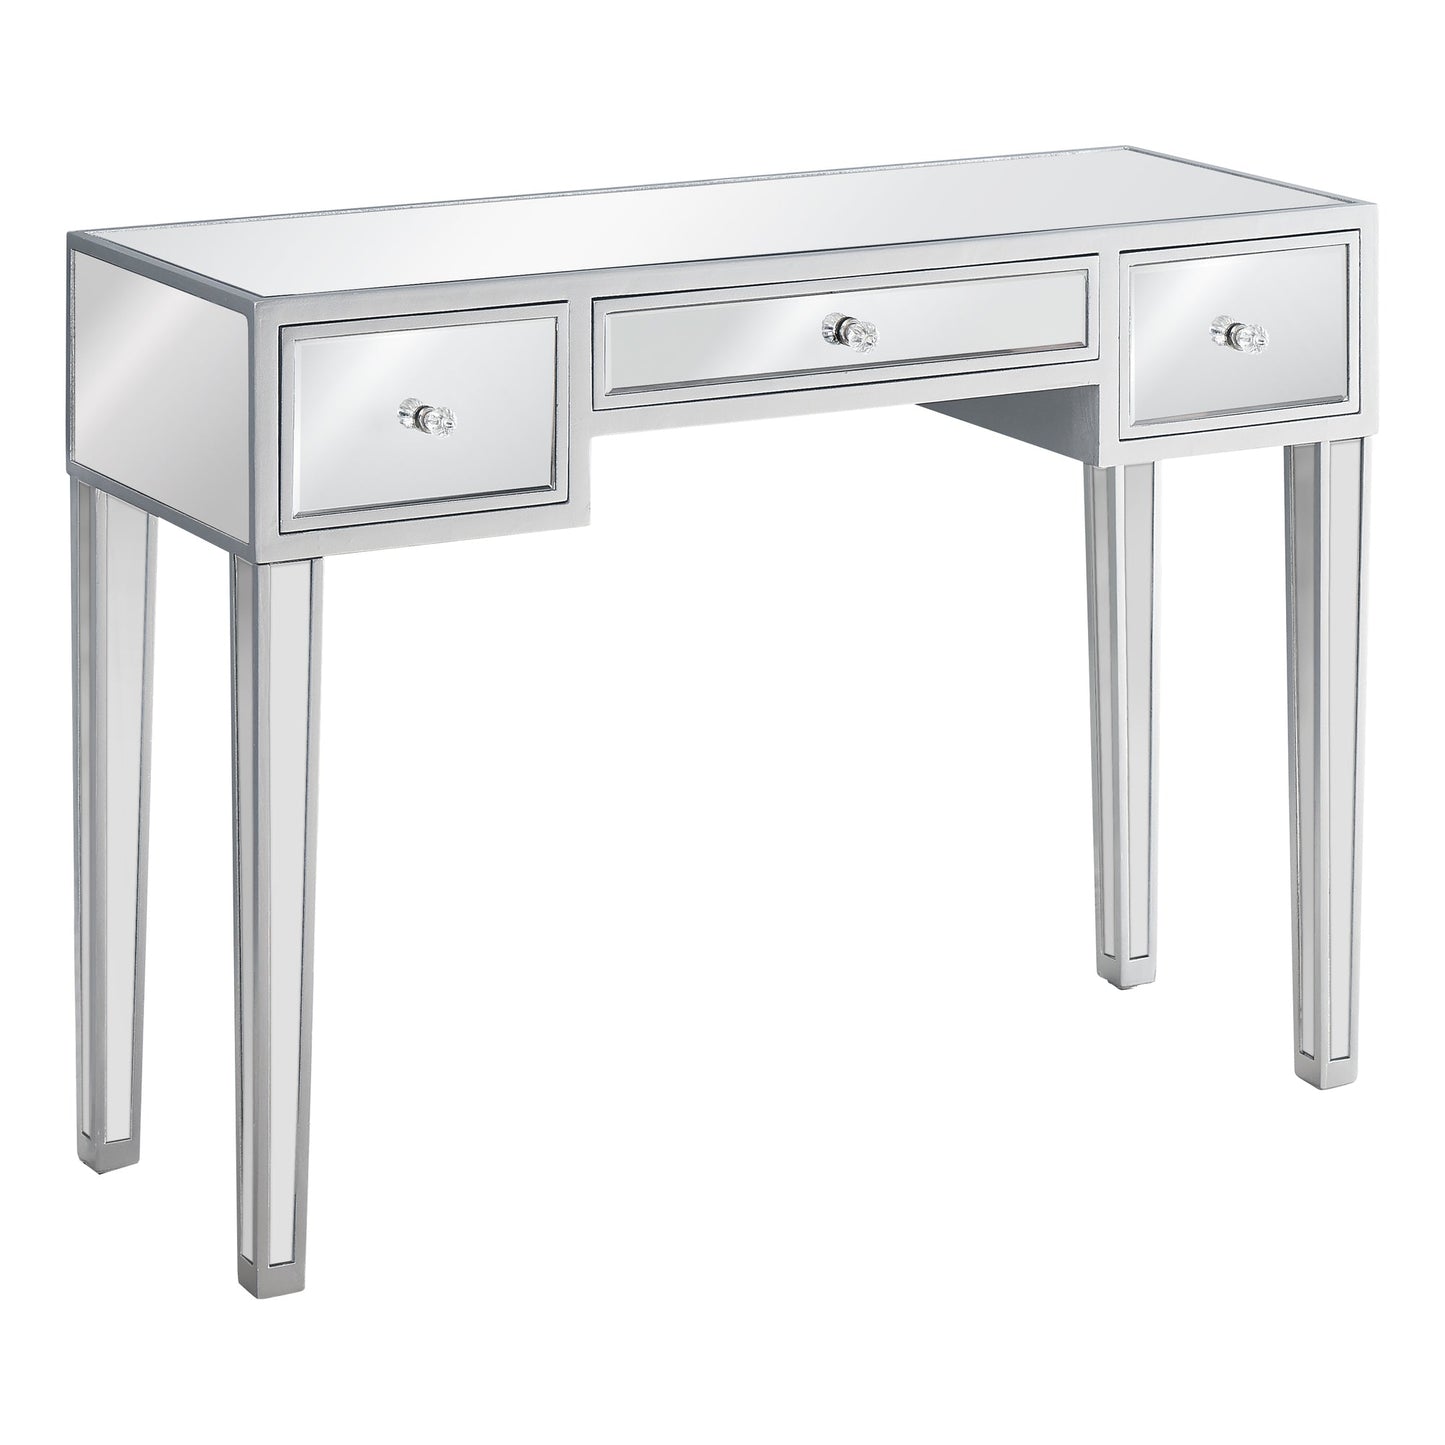 42"L Mirrored Chrome Bedroom Accent Console Table with Storage